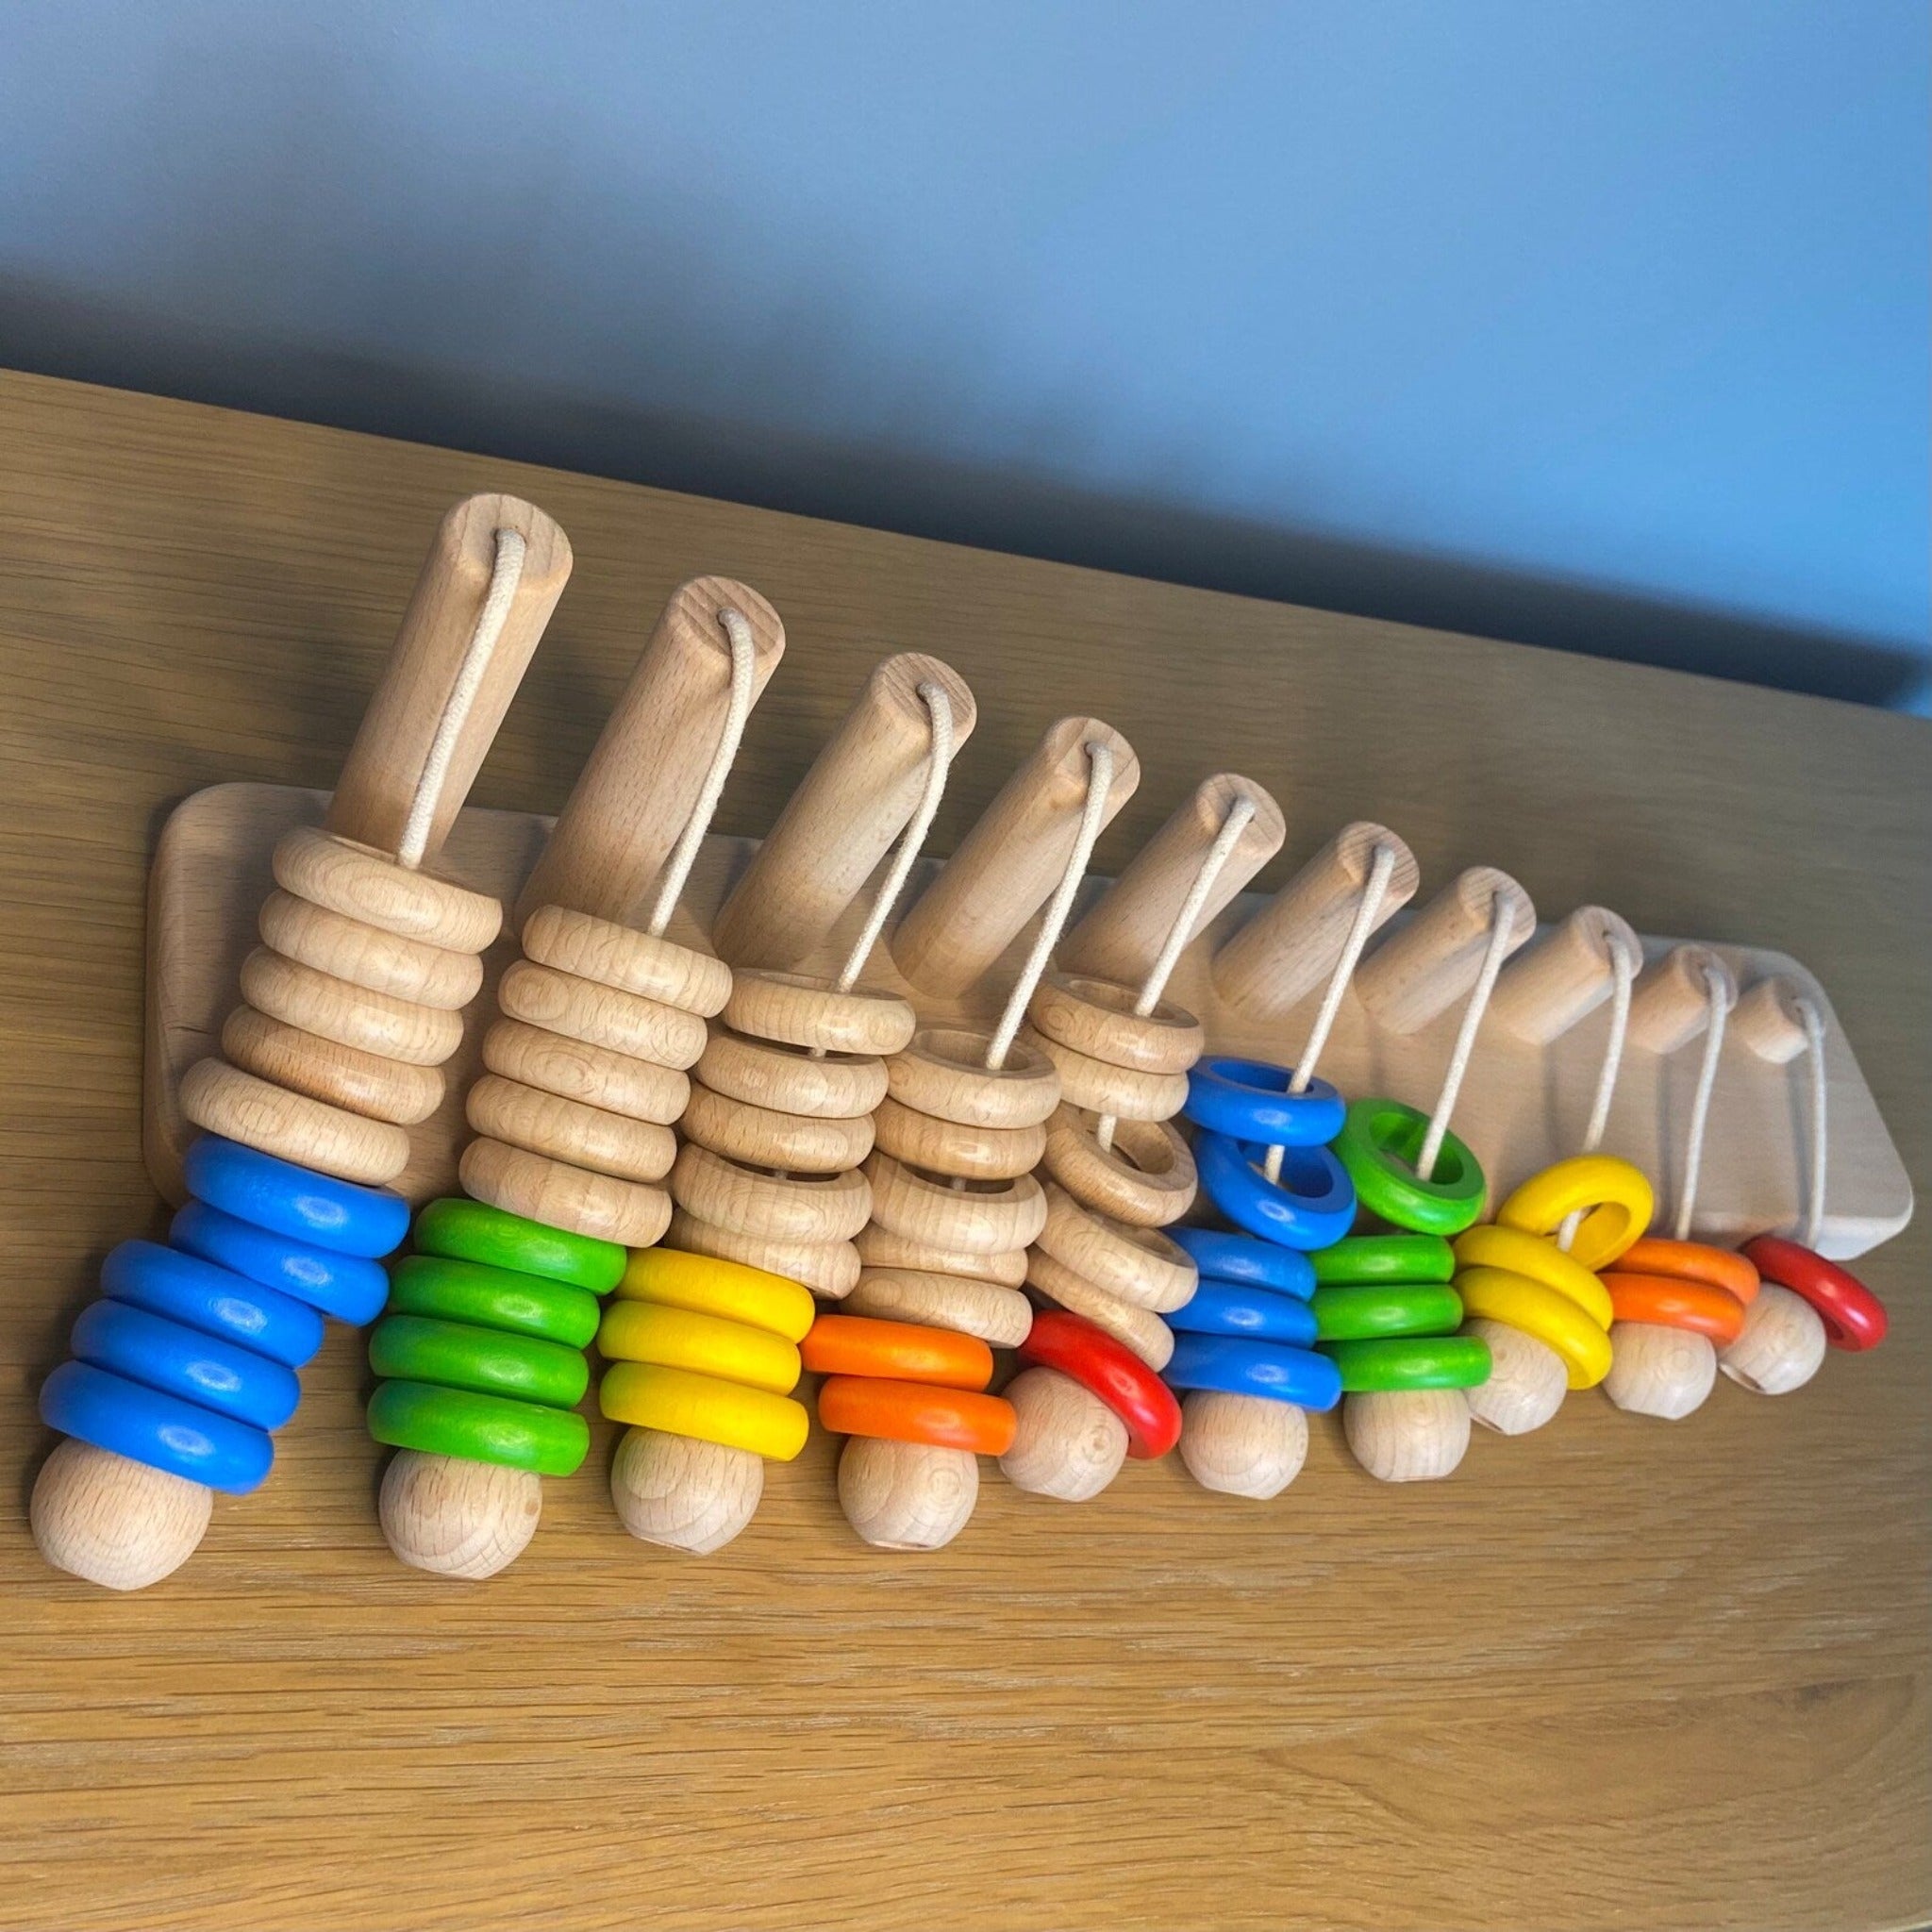 Rope Abacus counting stacker from Bajo